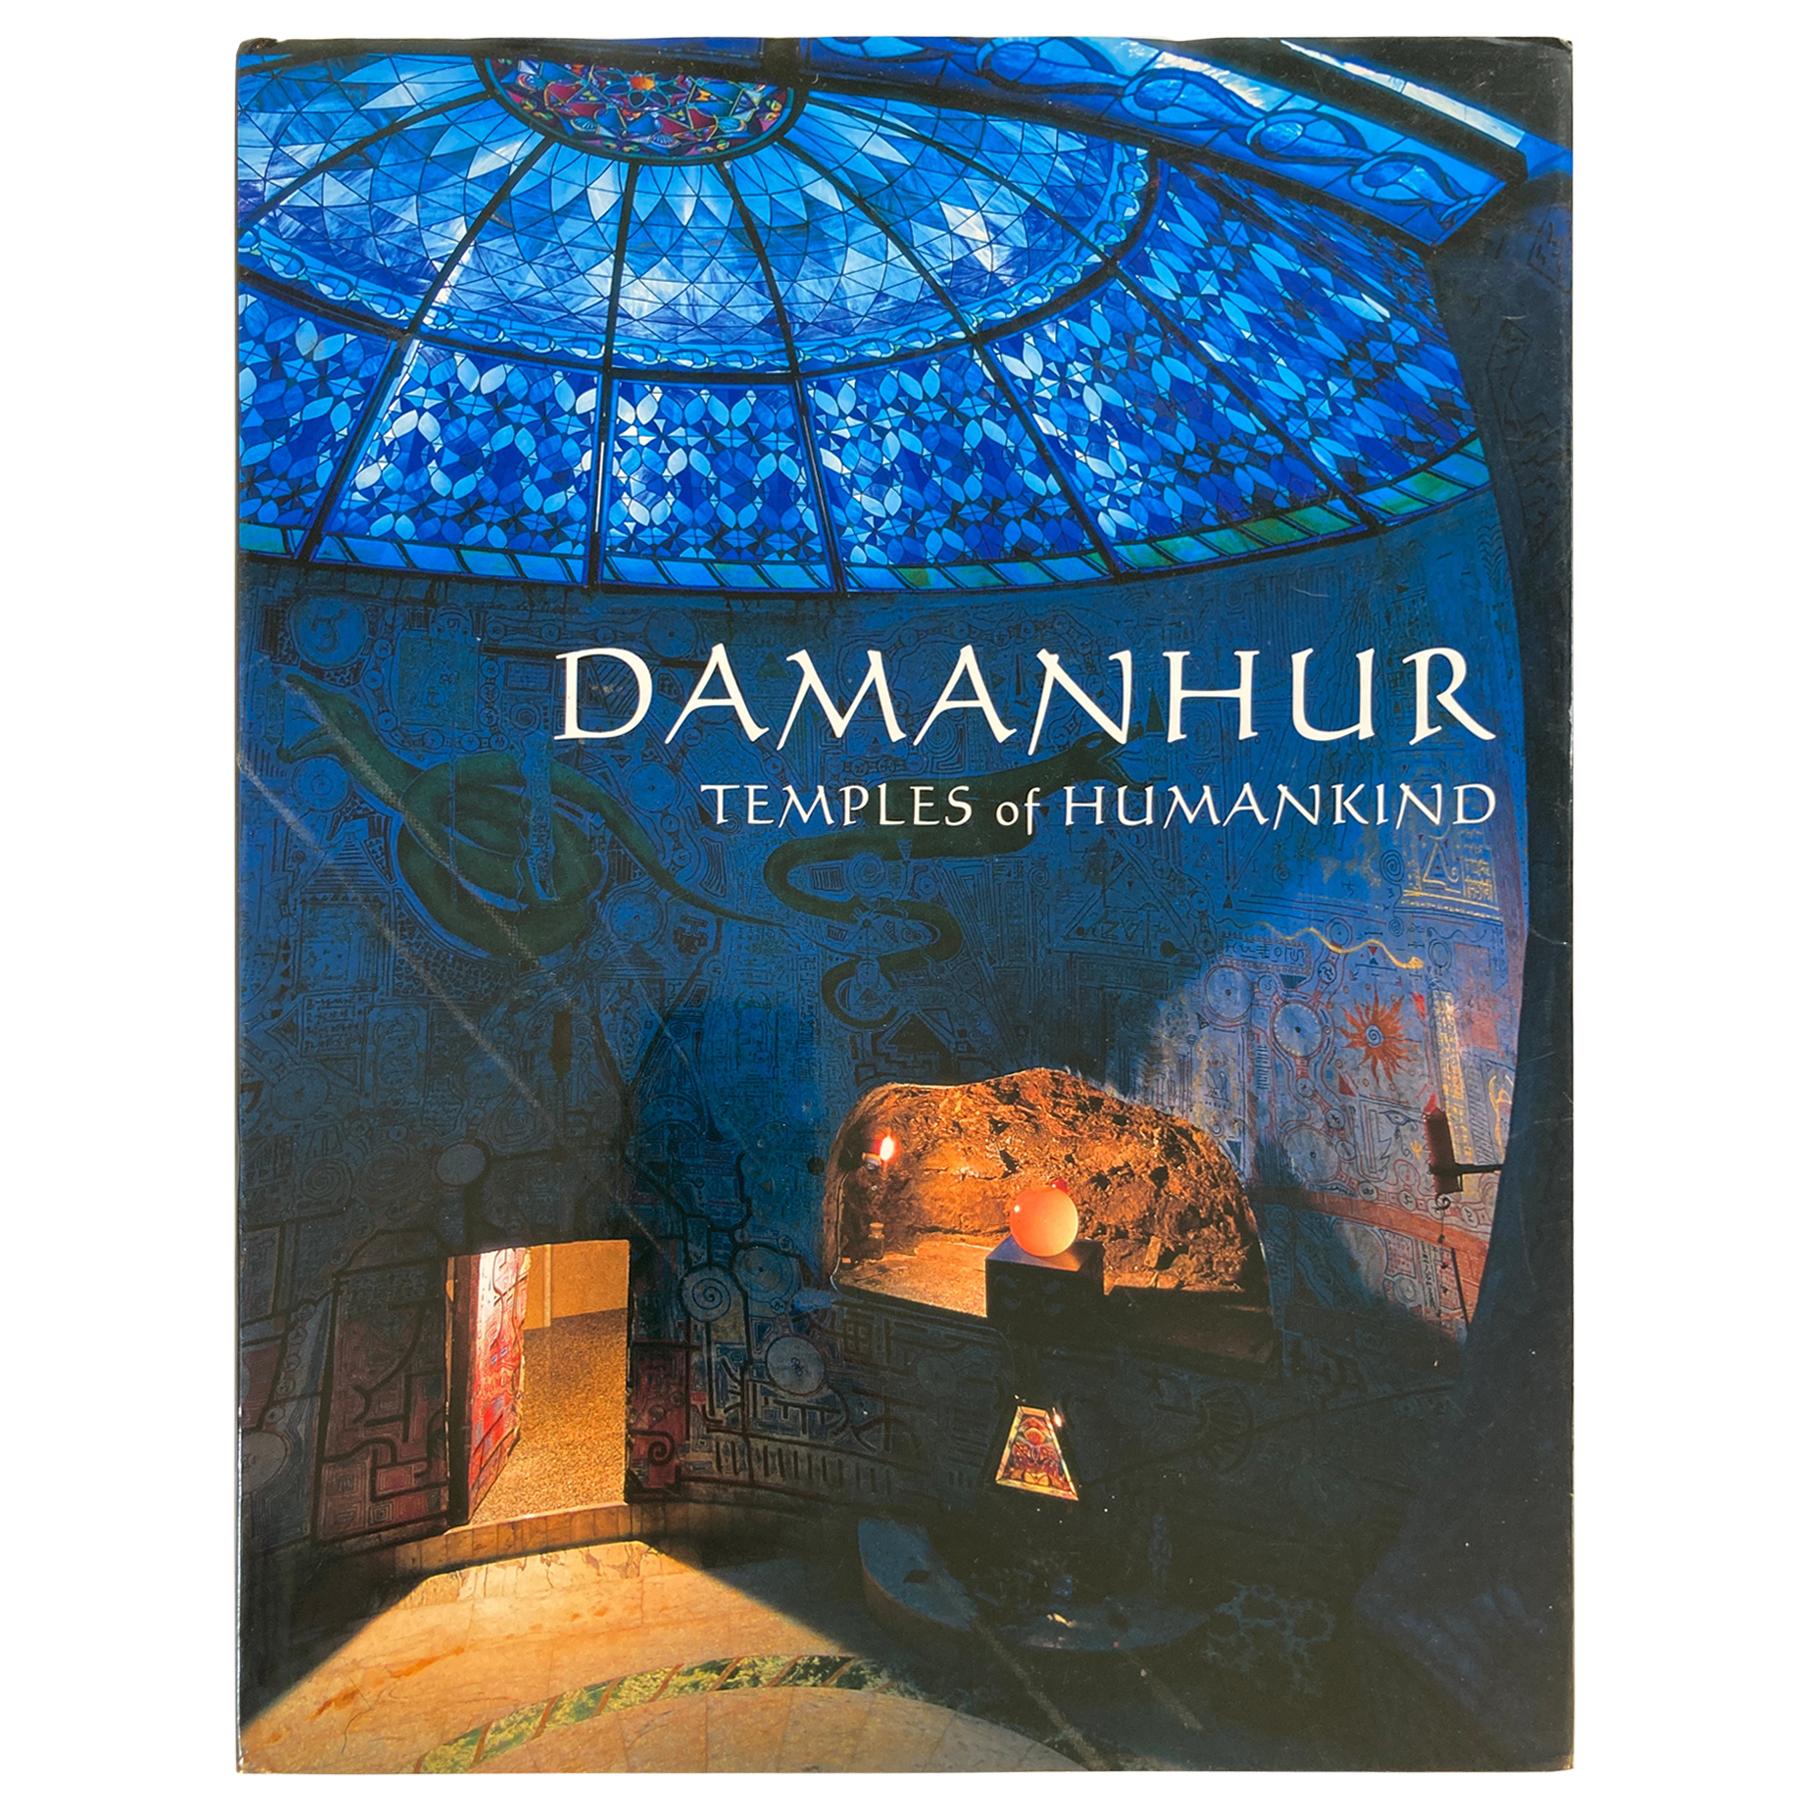 Damanhur Temples of Humankind Book by Ananas Esperide Coffee Table Art Book